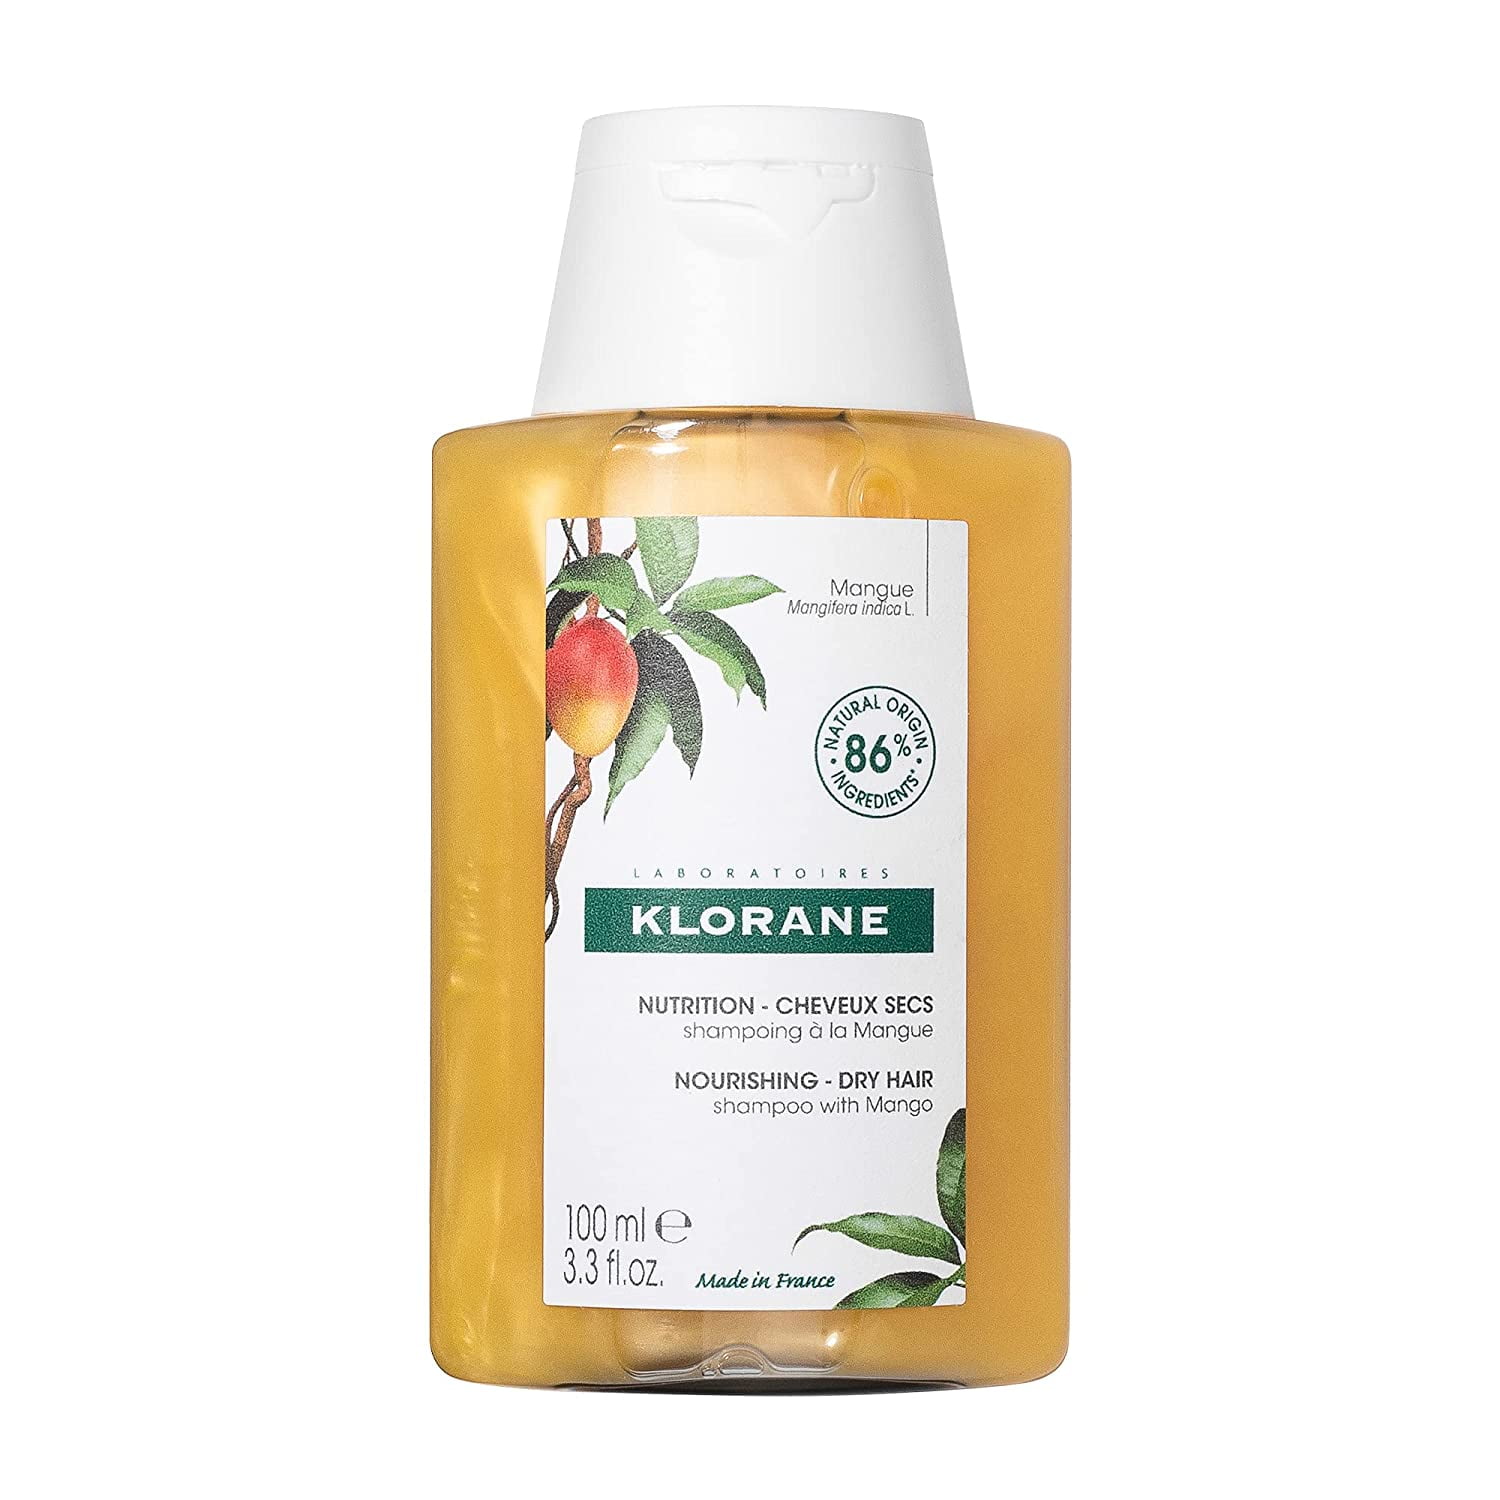 Klorane Nourishing Shampoo With Butter, Moisturize and Hydrate Dry Hair, Paraben, Silicone, Sls Free, Travel Size, 3.3 oz - Walmart.com